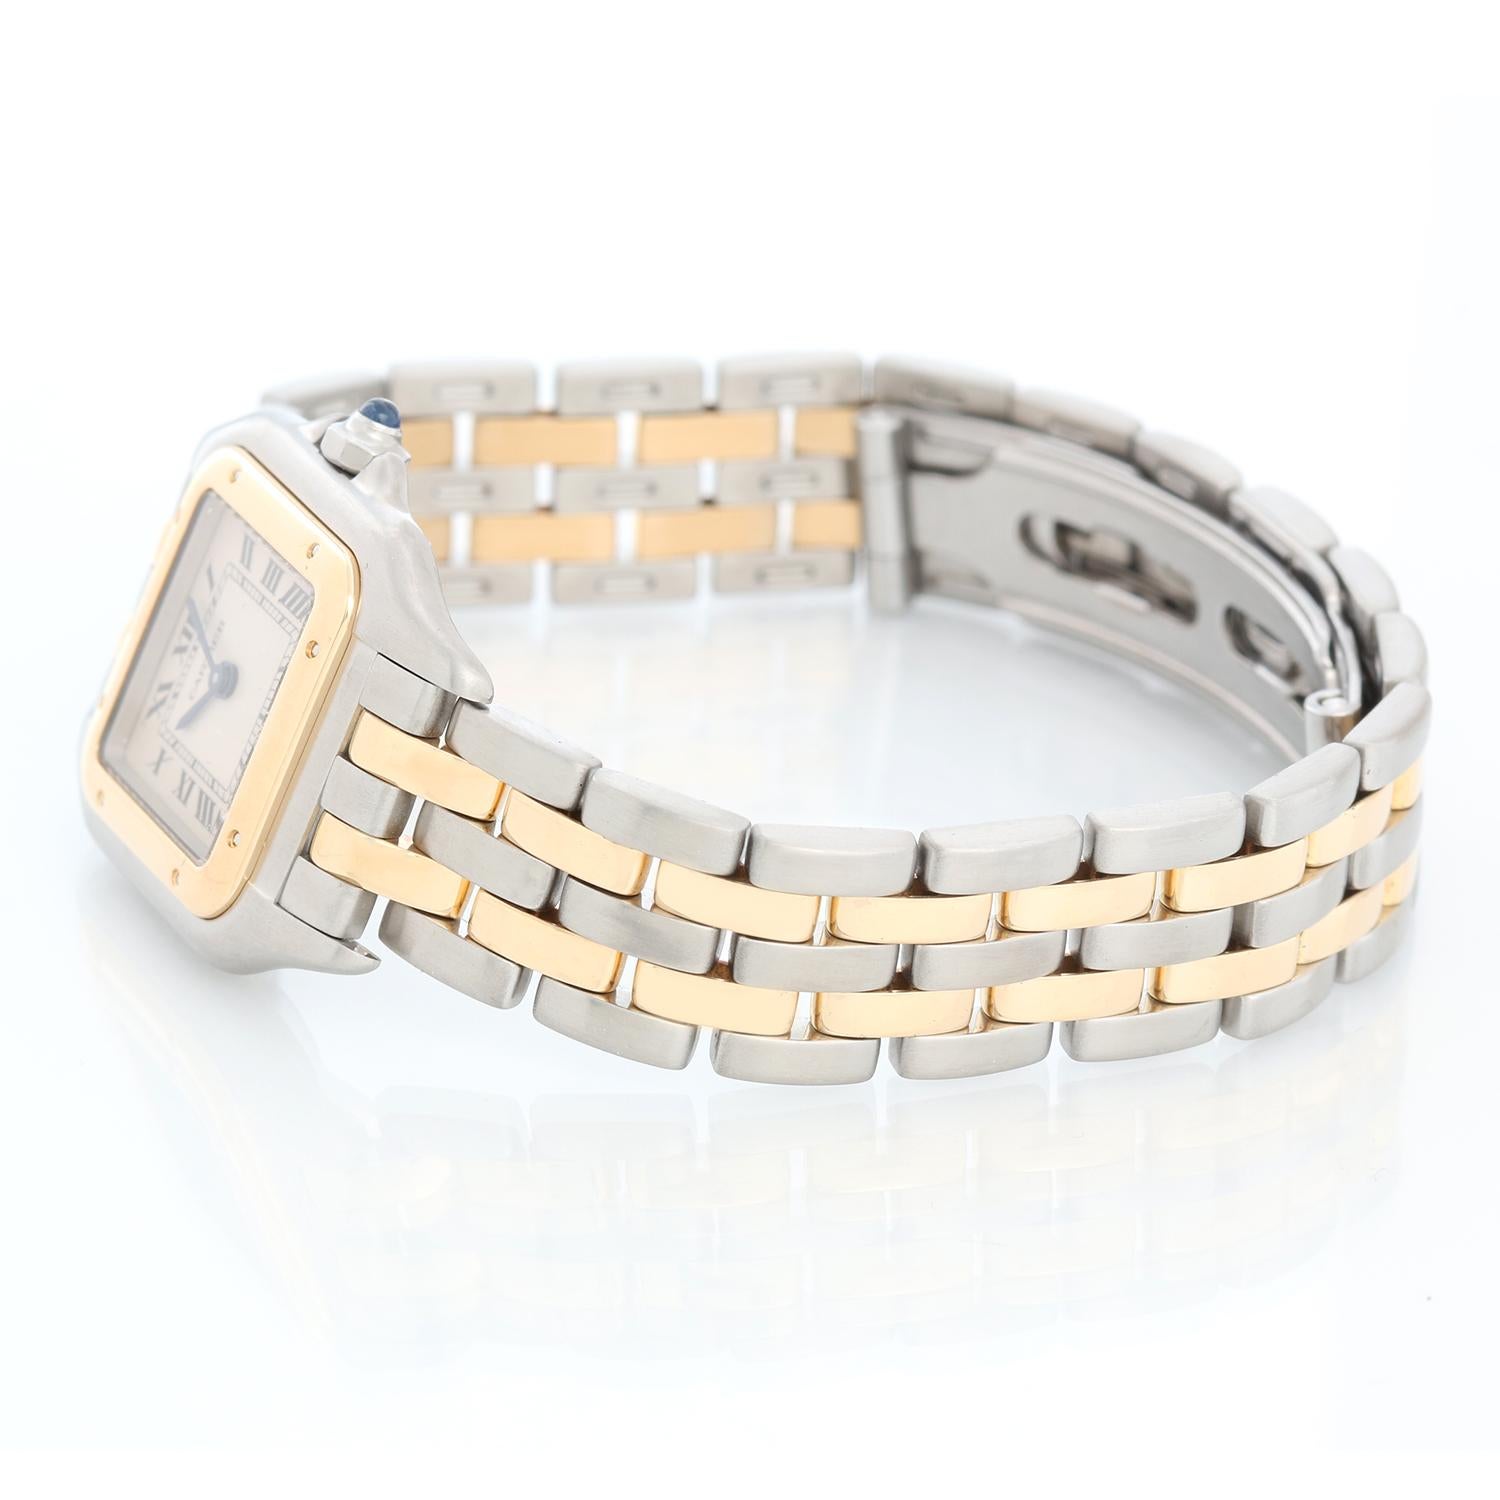 Cartier Panther Ladies 2-Tone 2-Row Steel & Gold Watch W25029B6 - Quartz. Stainless steel case with 18k yellow gold bezel (21mm x 30mm). Ivory colored dial with black Roman numerals. Stainless steel and 2-row 18k yellow gold Panthere bracelet.